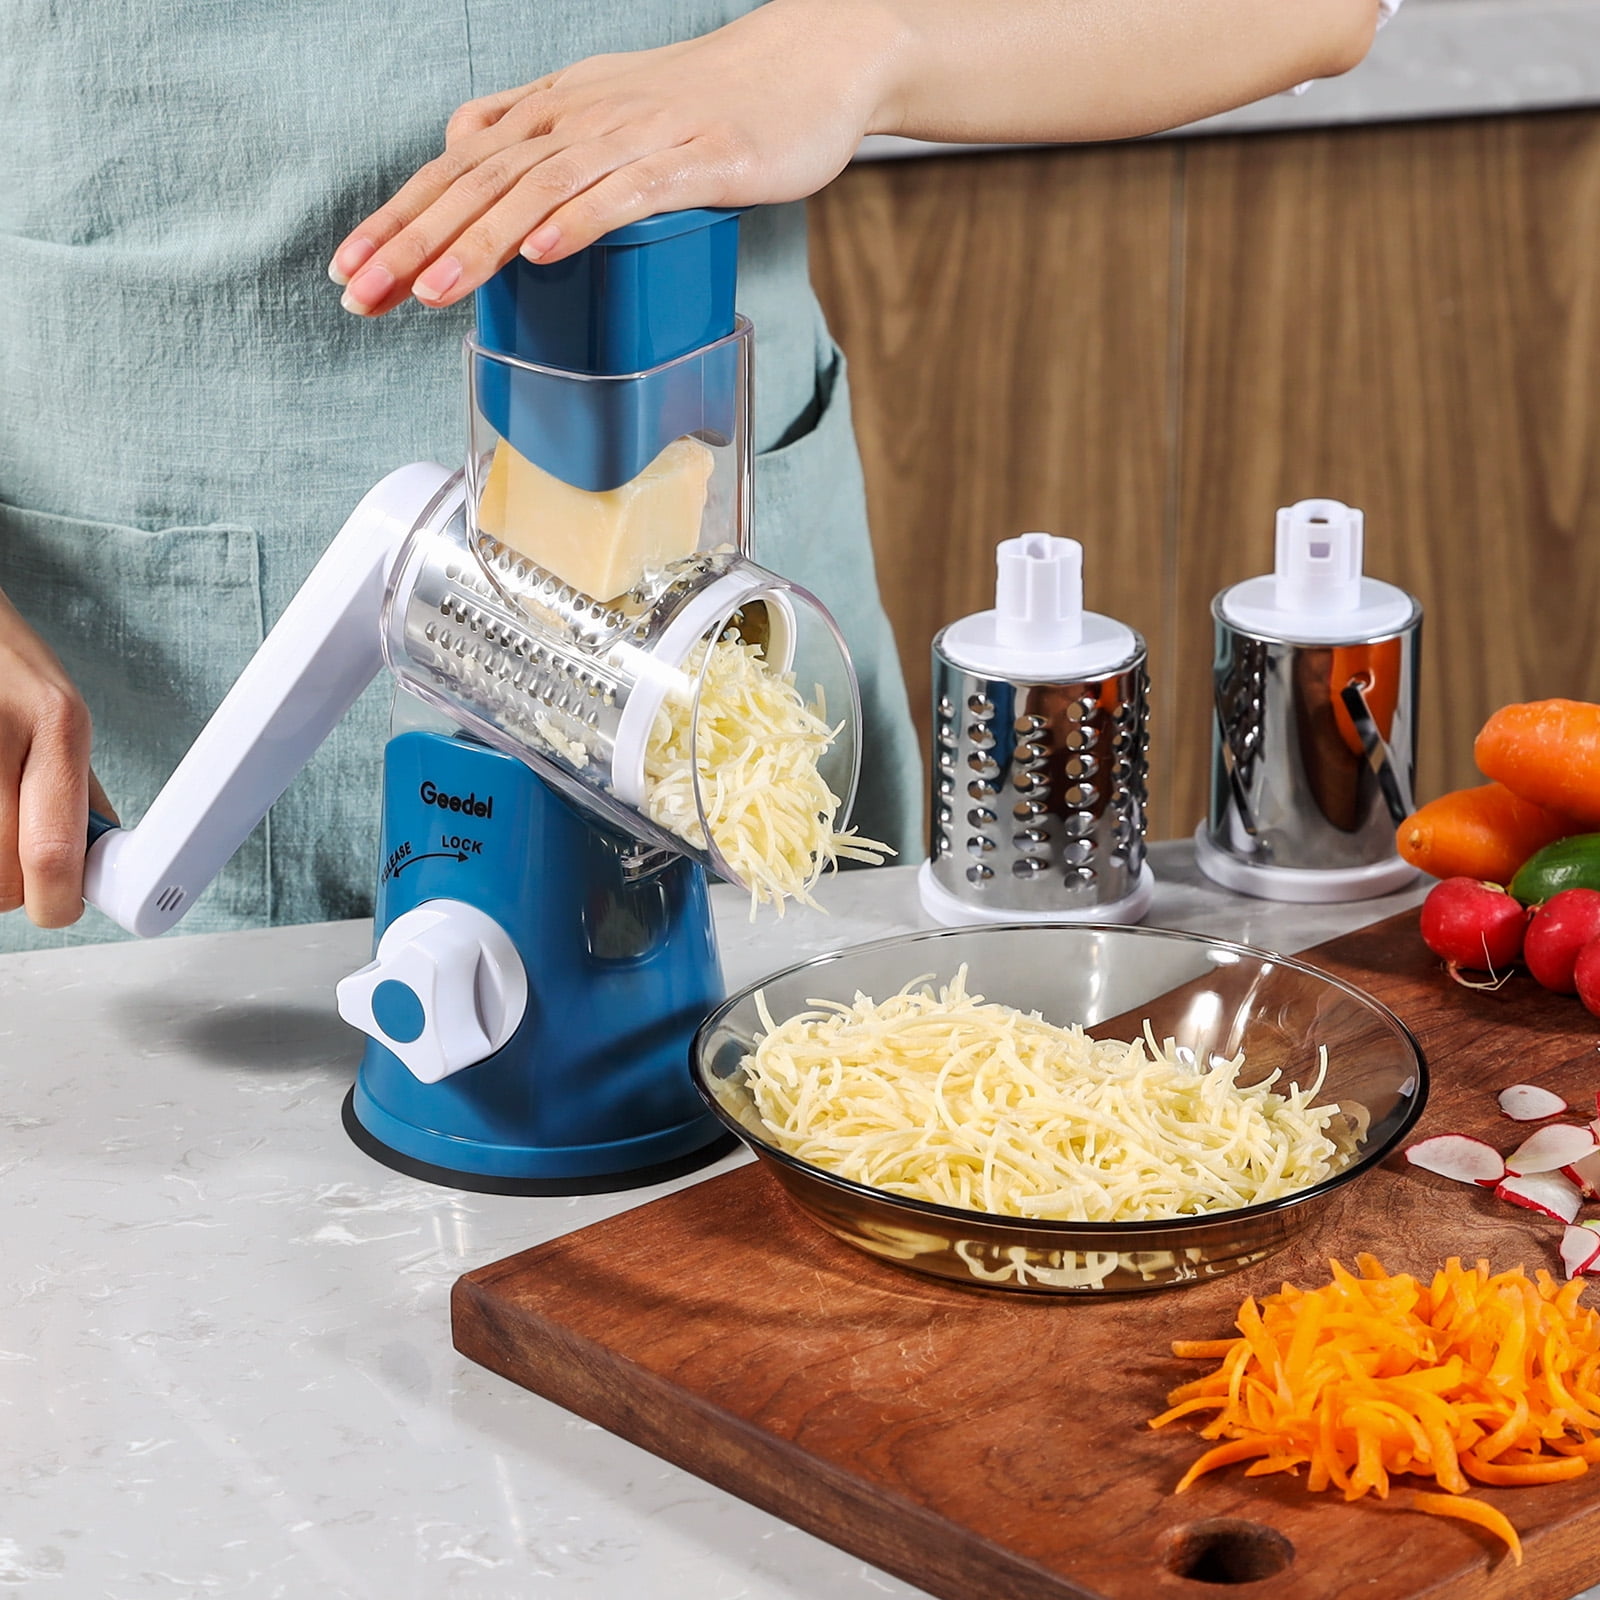 New 3 in 1 Set Manual Vegetable Slicer Kitchen Rotary Cheese Grater -  JES0272 - IdeaStage Promotional Products